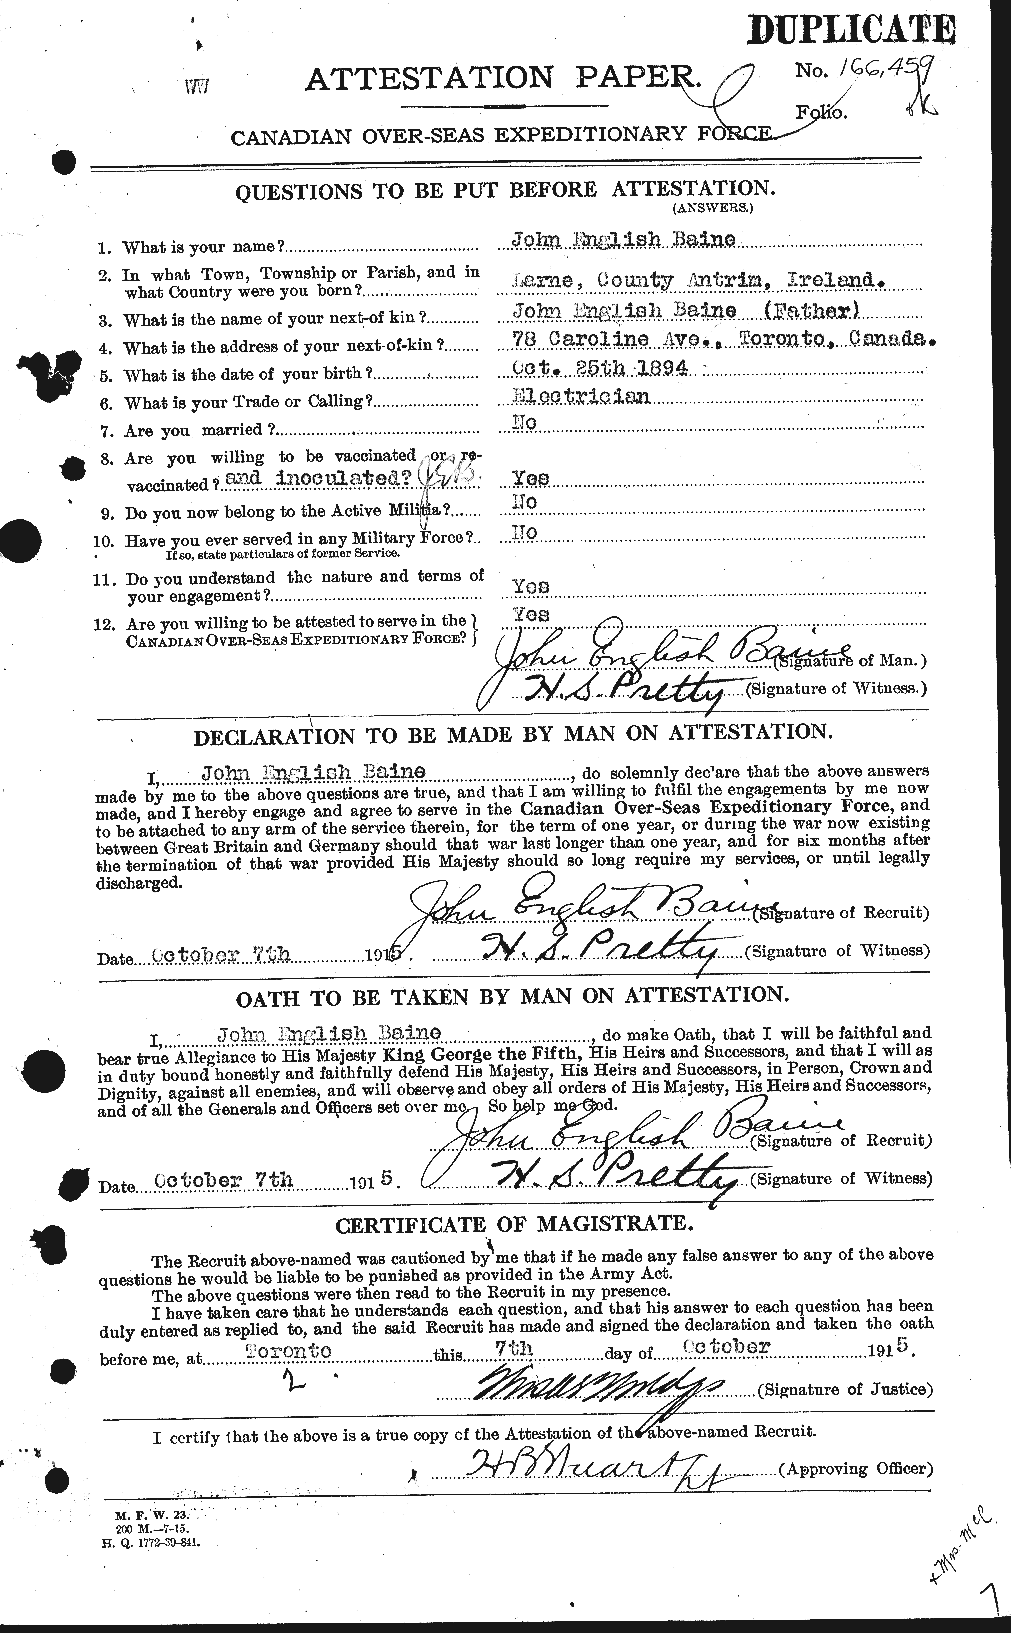 Personnel Records of the First World War - CEF 226760a